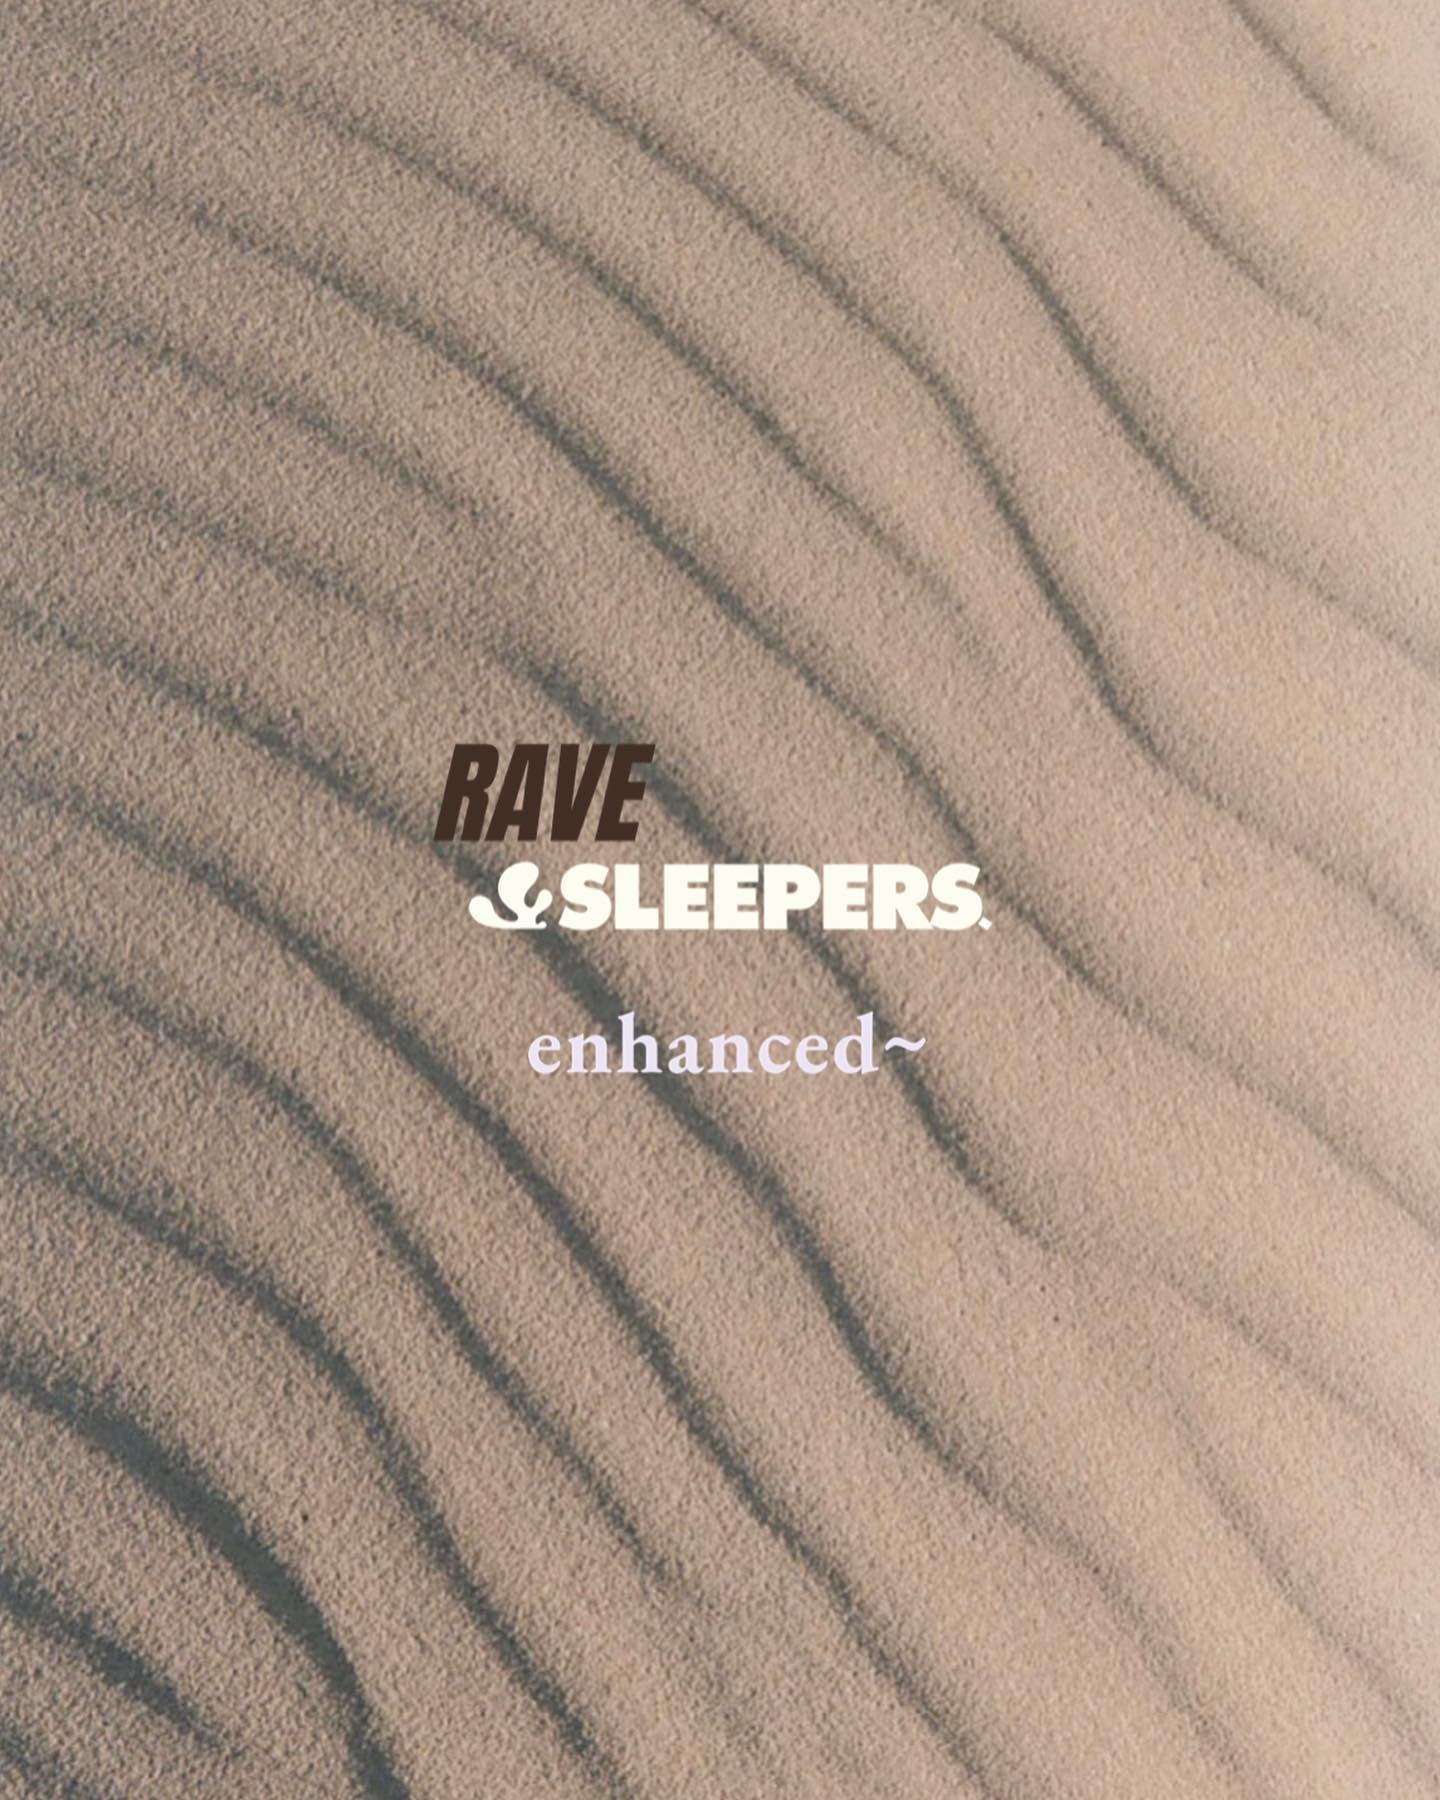 Slip into inner peace on 23.5.24 ~ an enhanced brand experience for portfolio partner @shopsleepers, facilitated by @rave__yoga